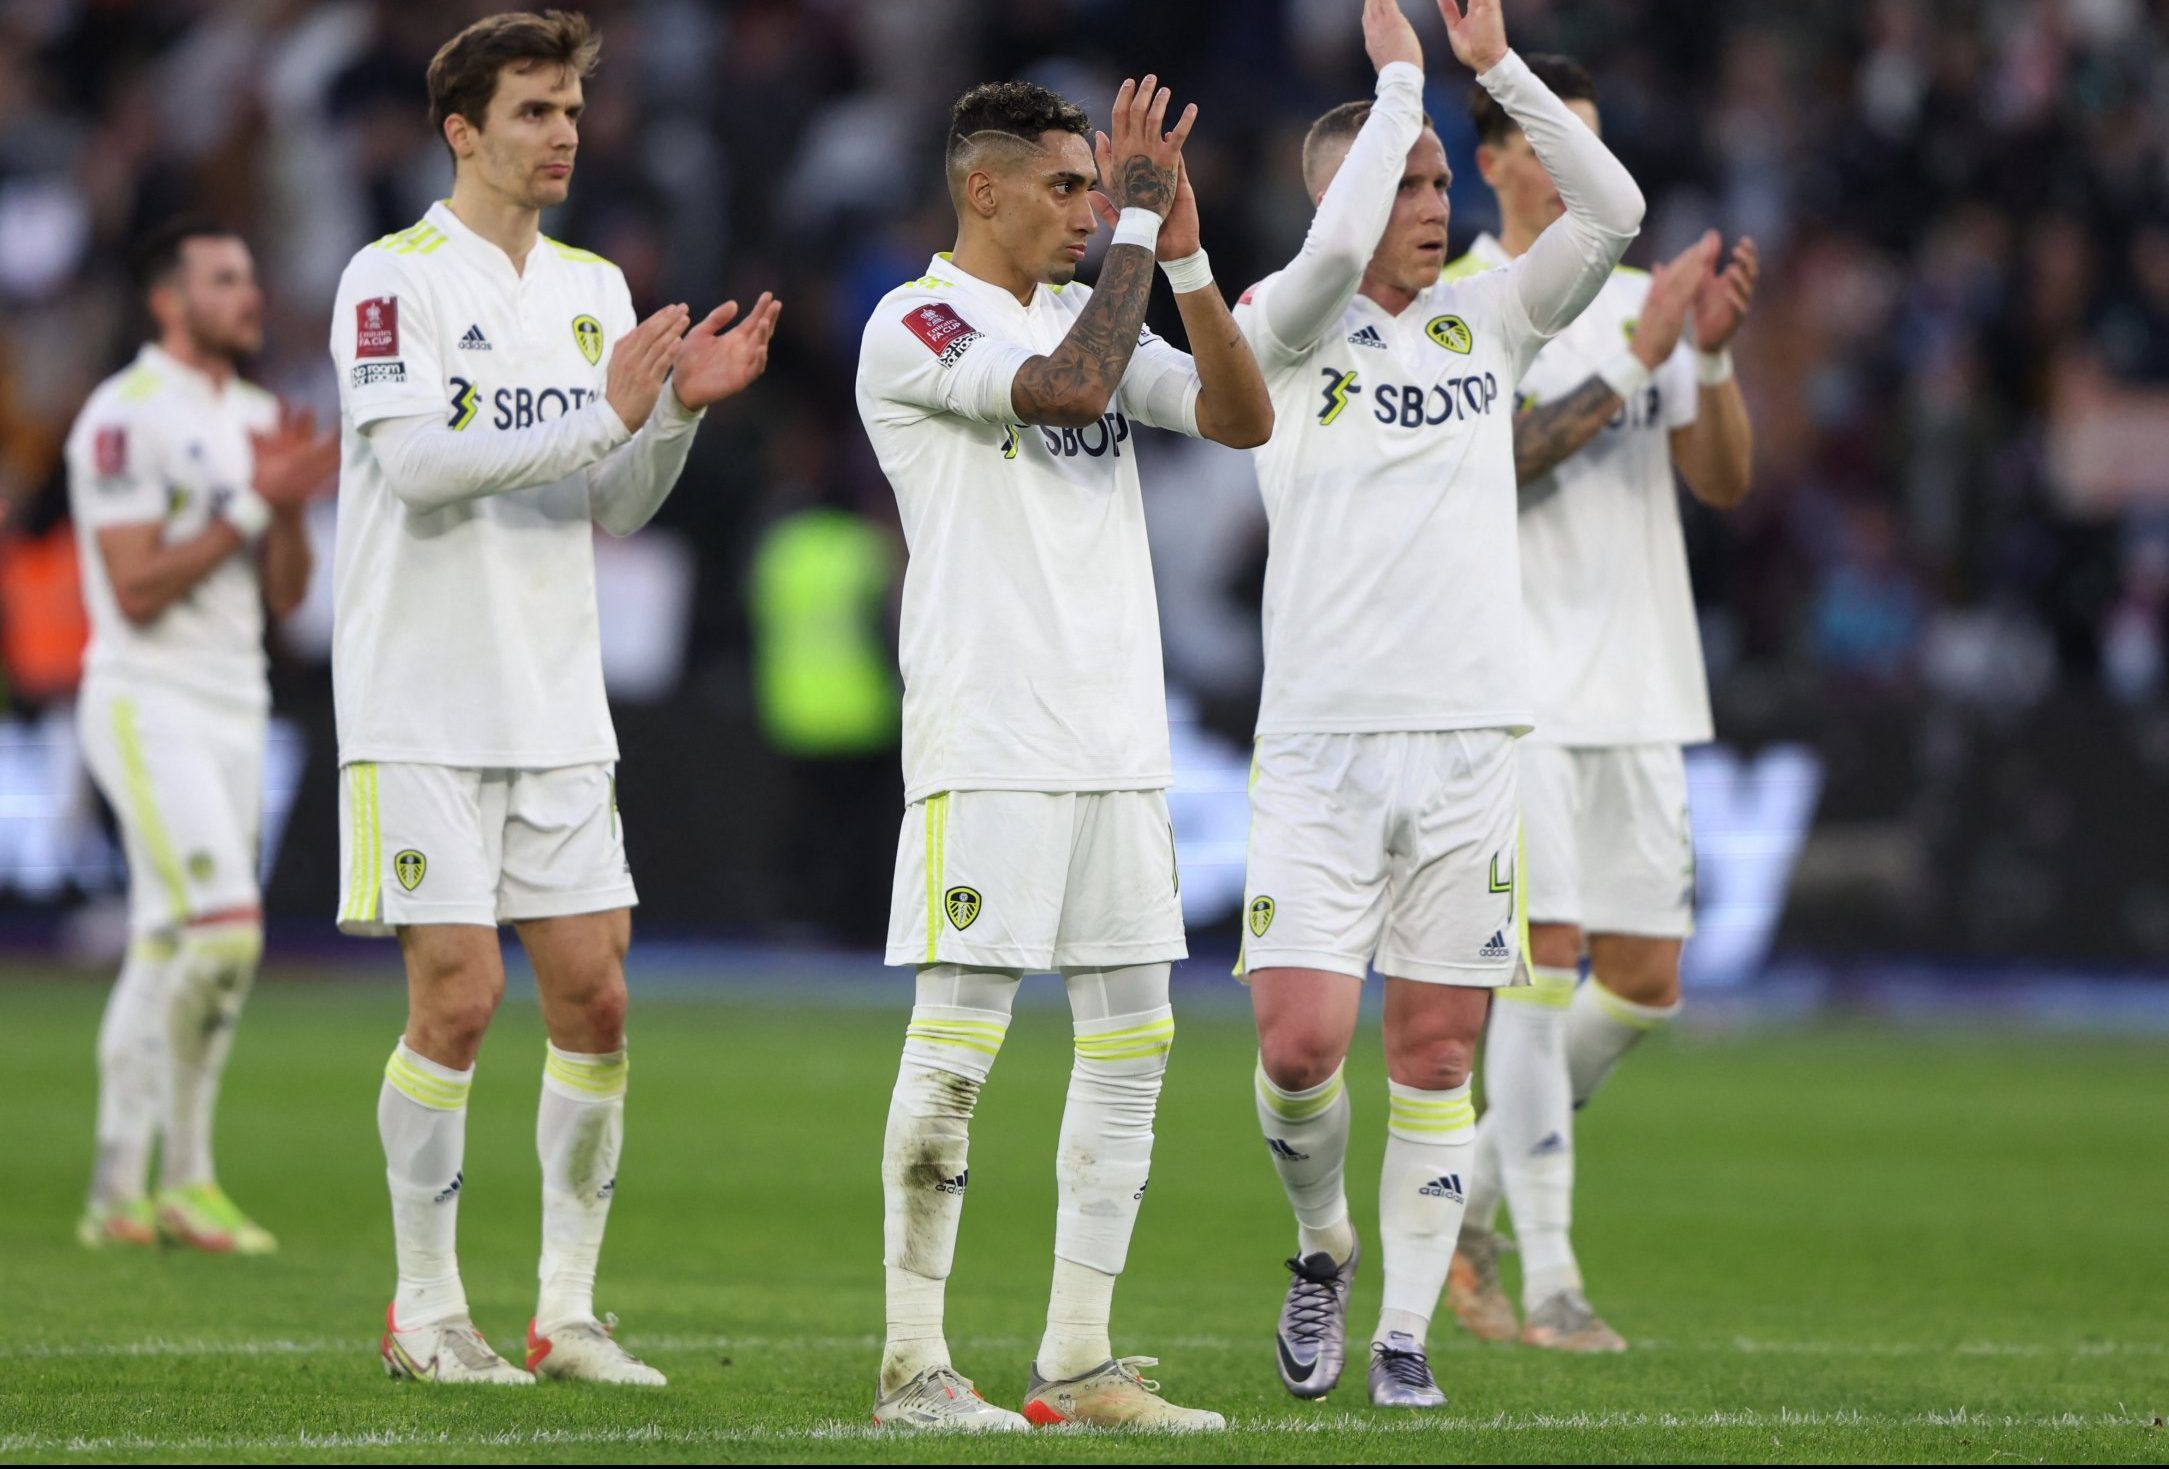 Leeds United players applaud supporters after FA Cup defeat to West Ham